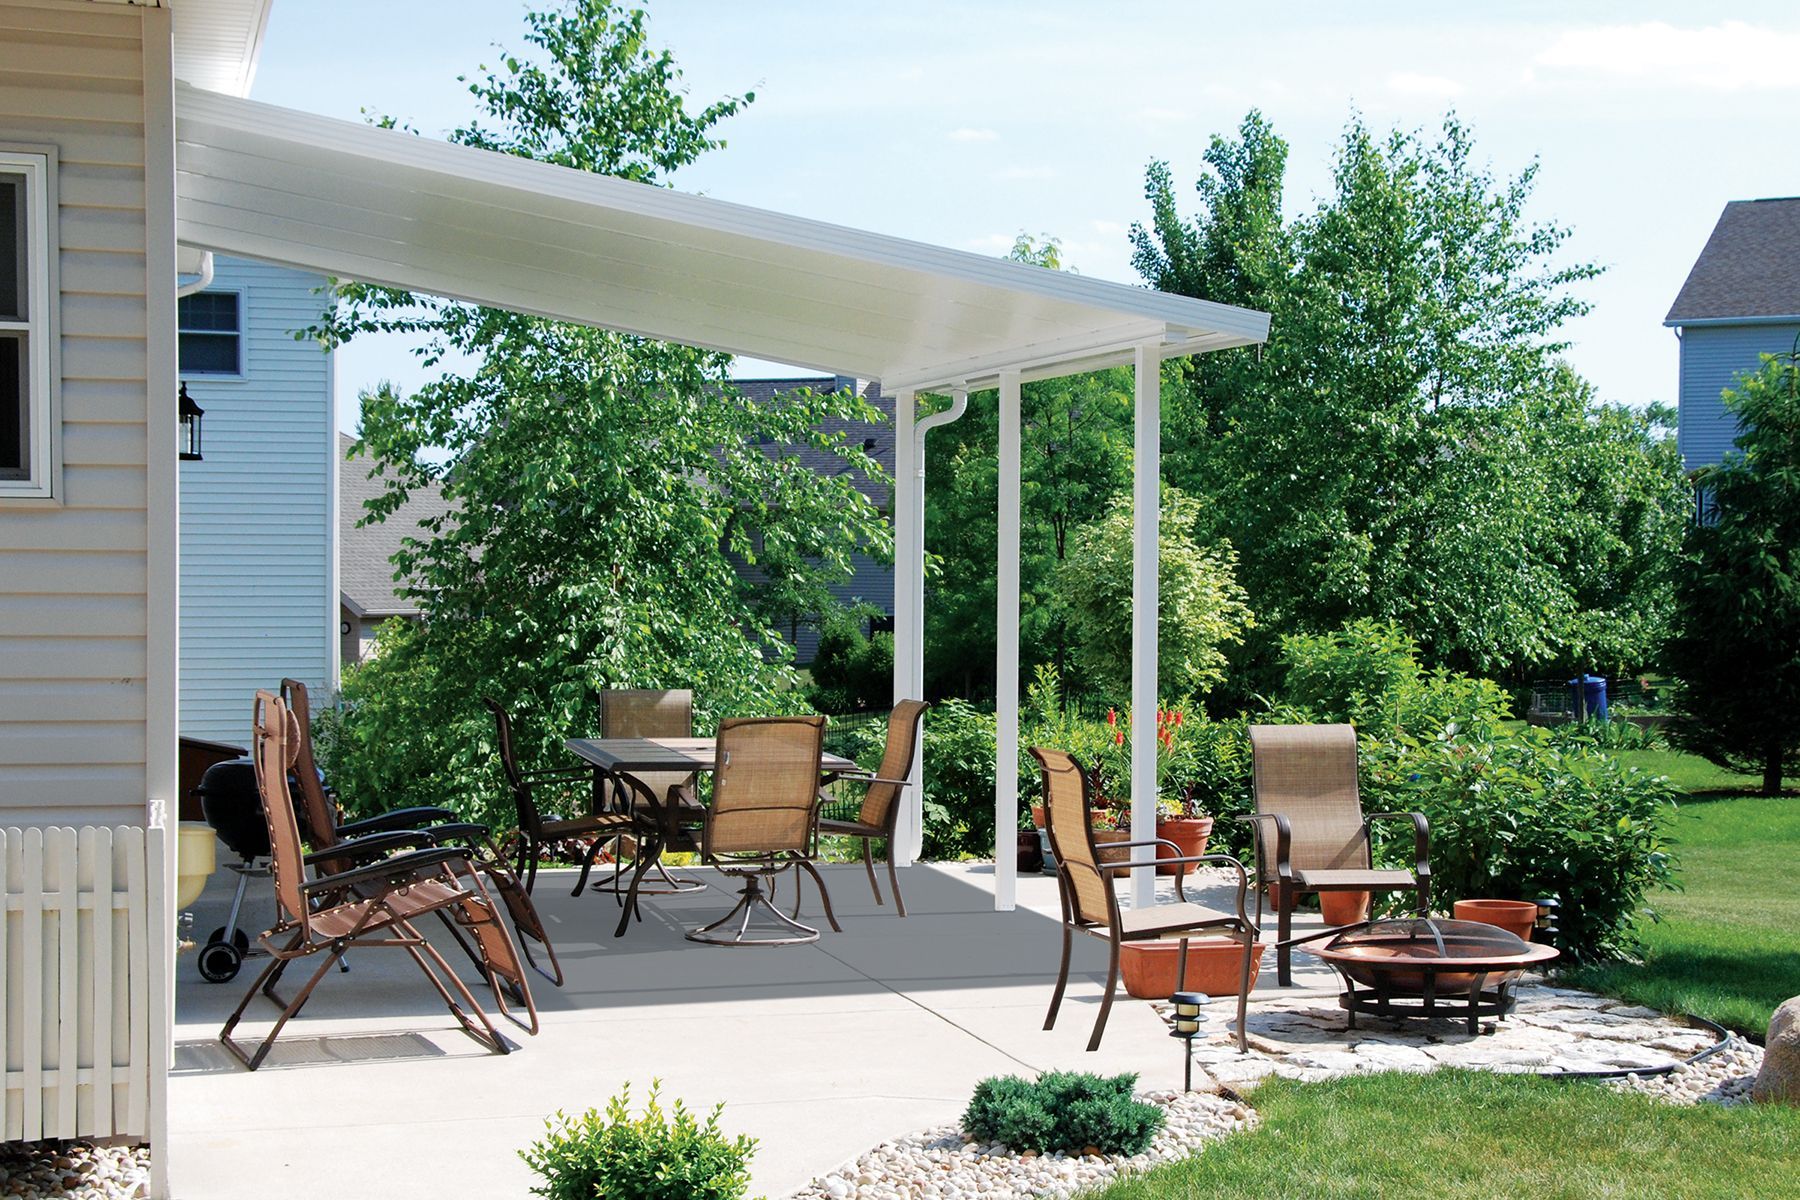 Photo of a Betterliving Patio and Sunrooms of Pittsburgh's patio cover